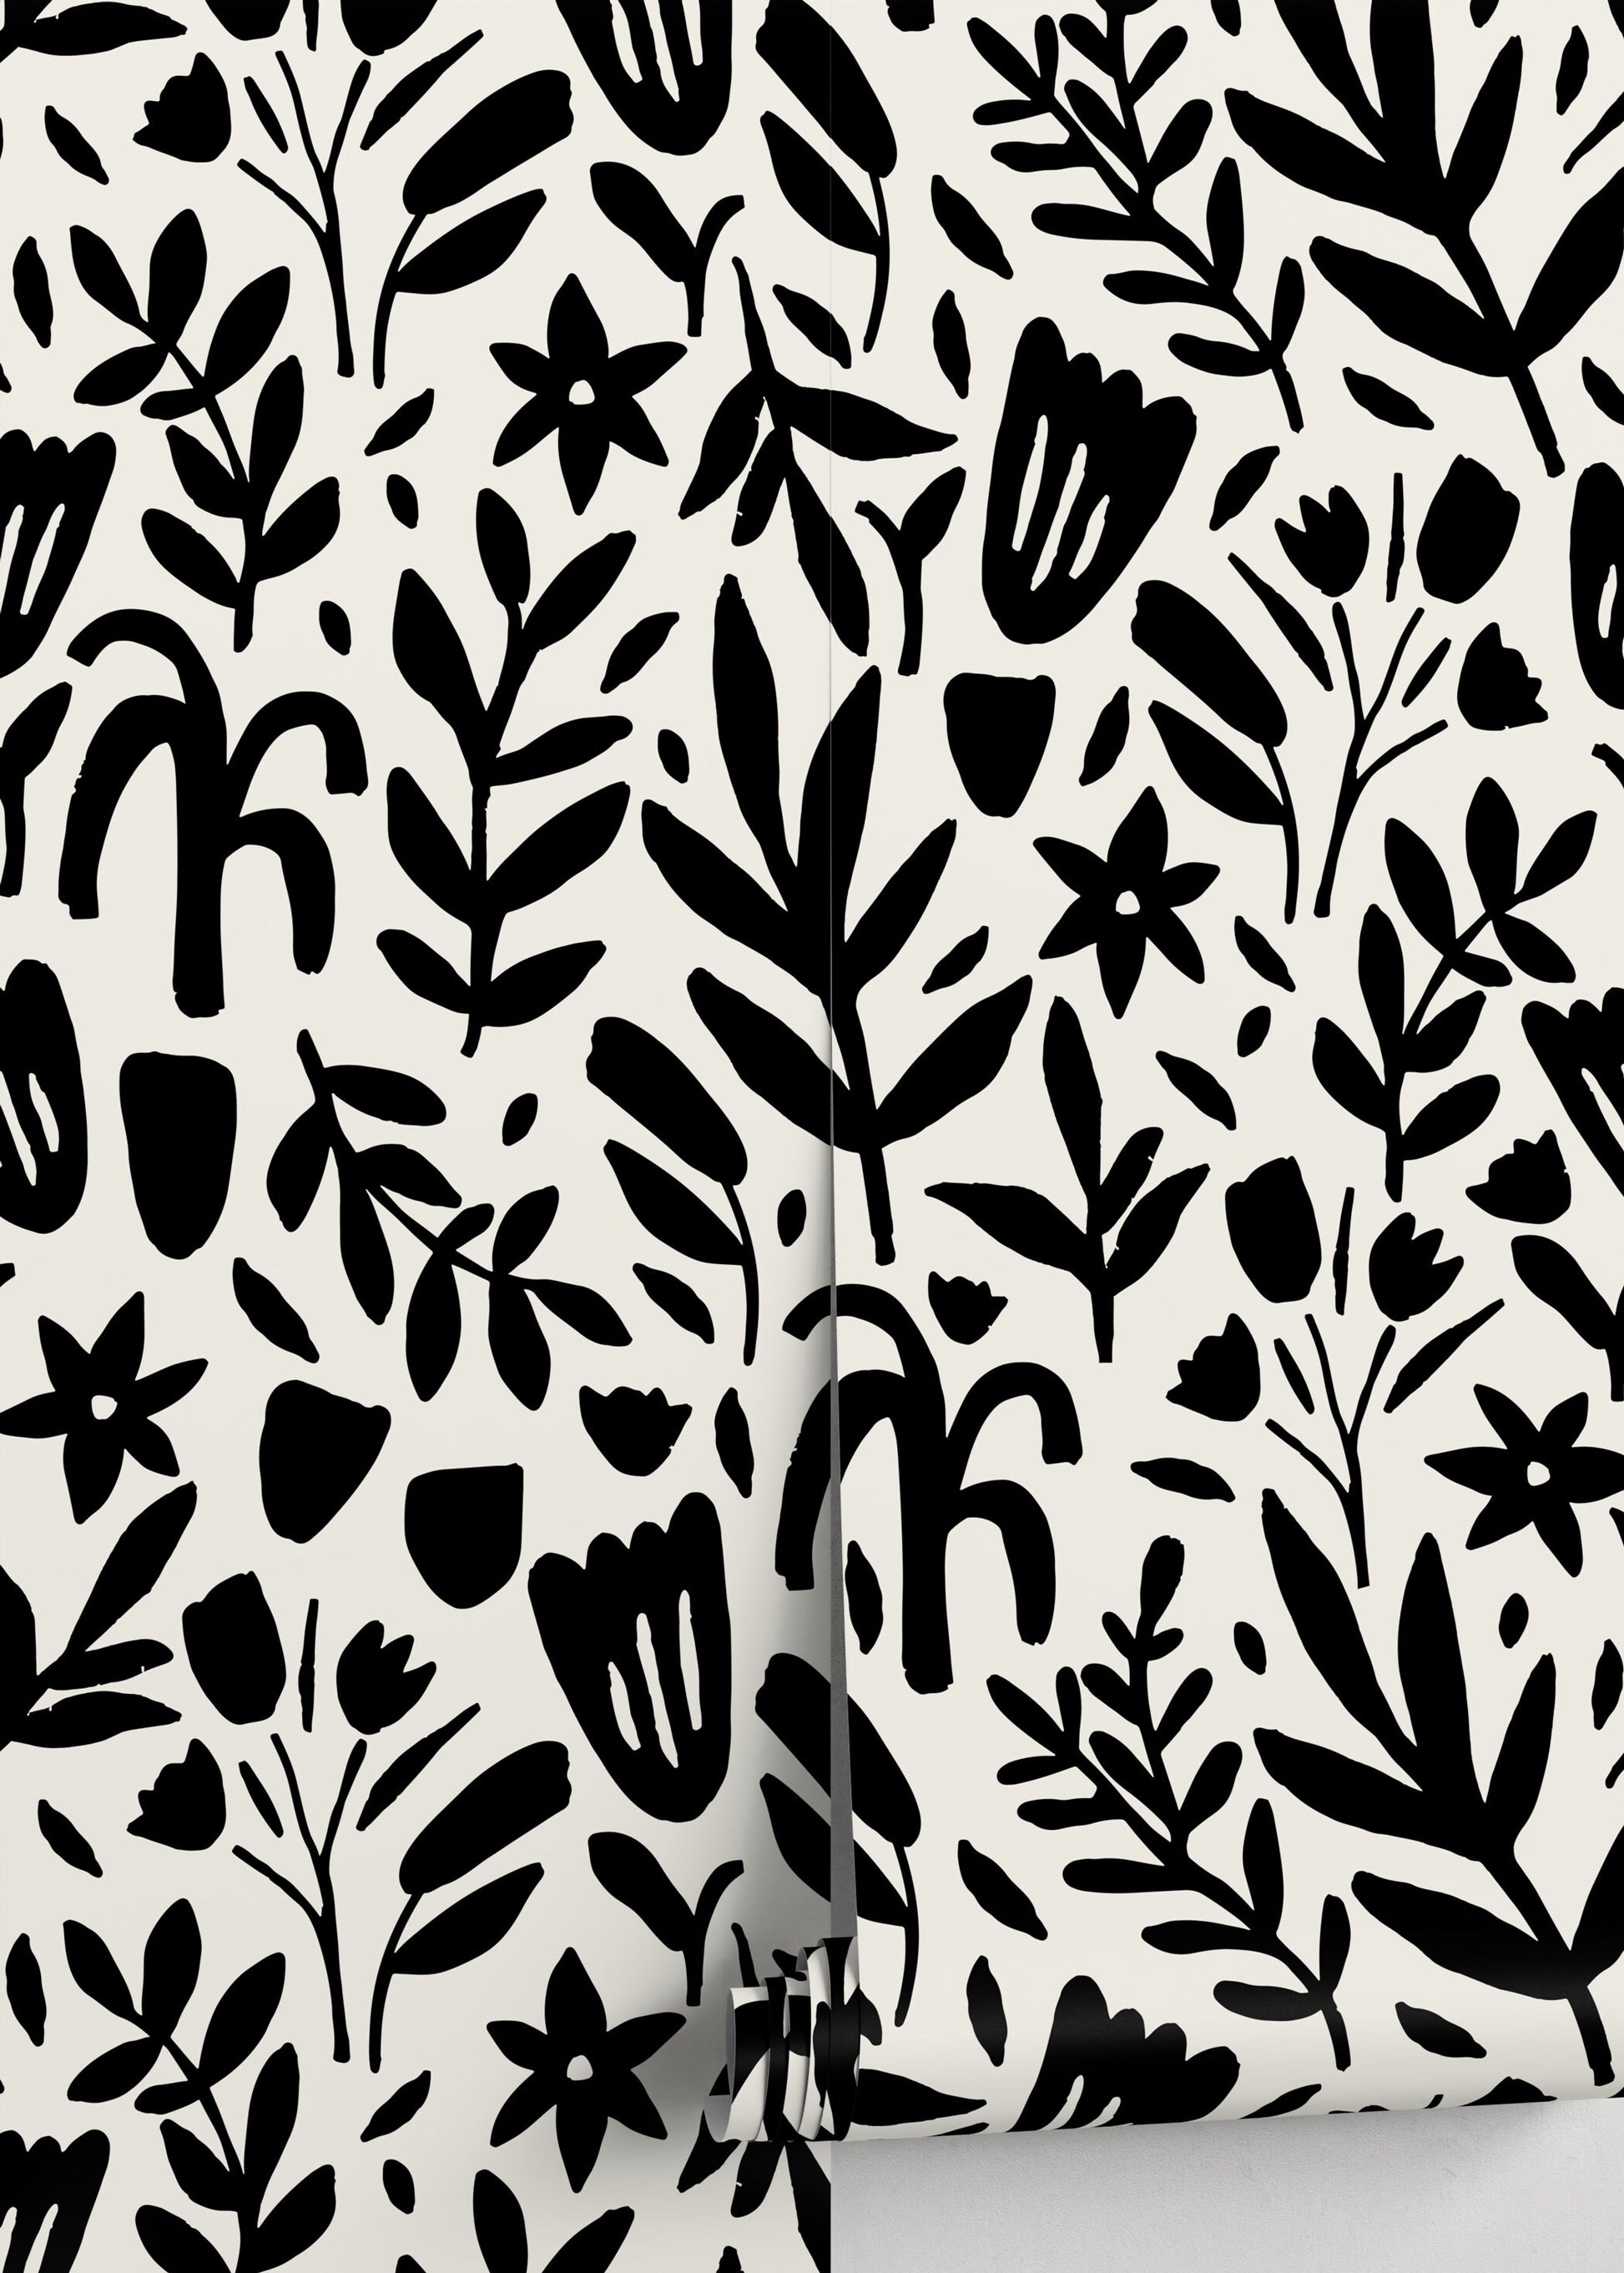 Black and White Floral Wallpaper / Peel and Stick Wallpaper Removable Wallpaper Home Decor Wall Art Wall Decor Room Decor - D370